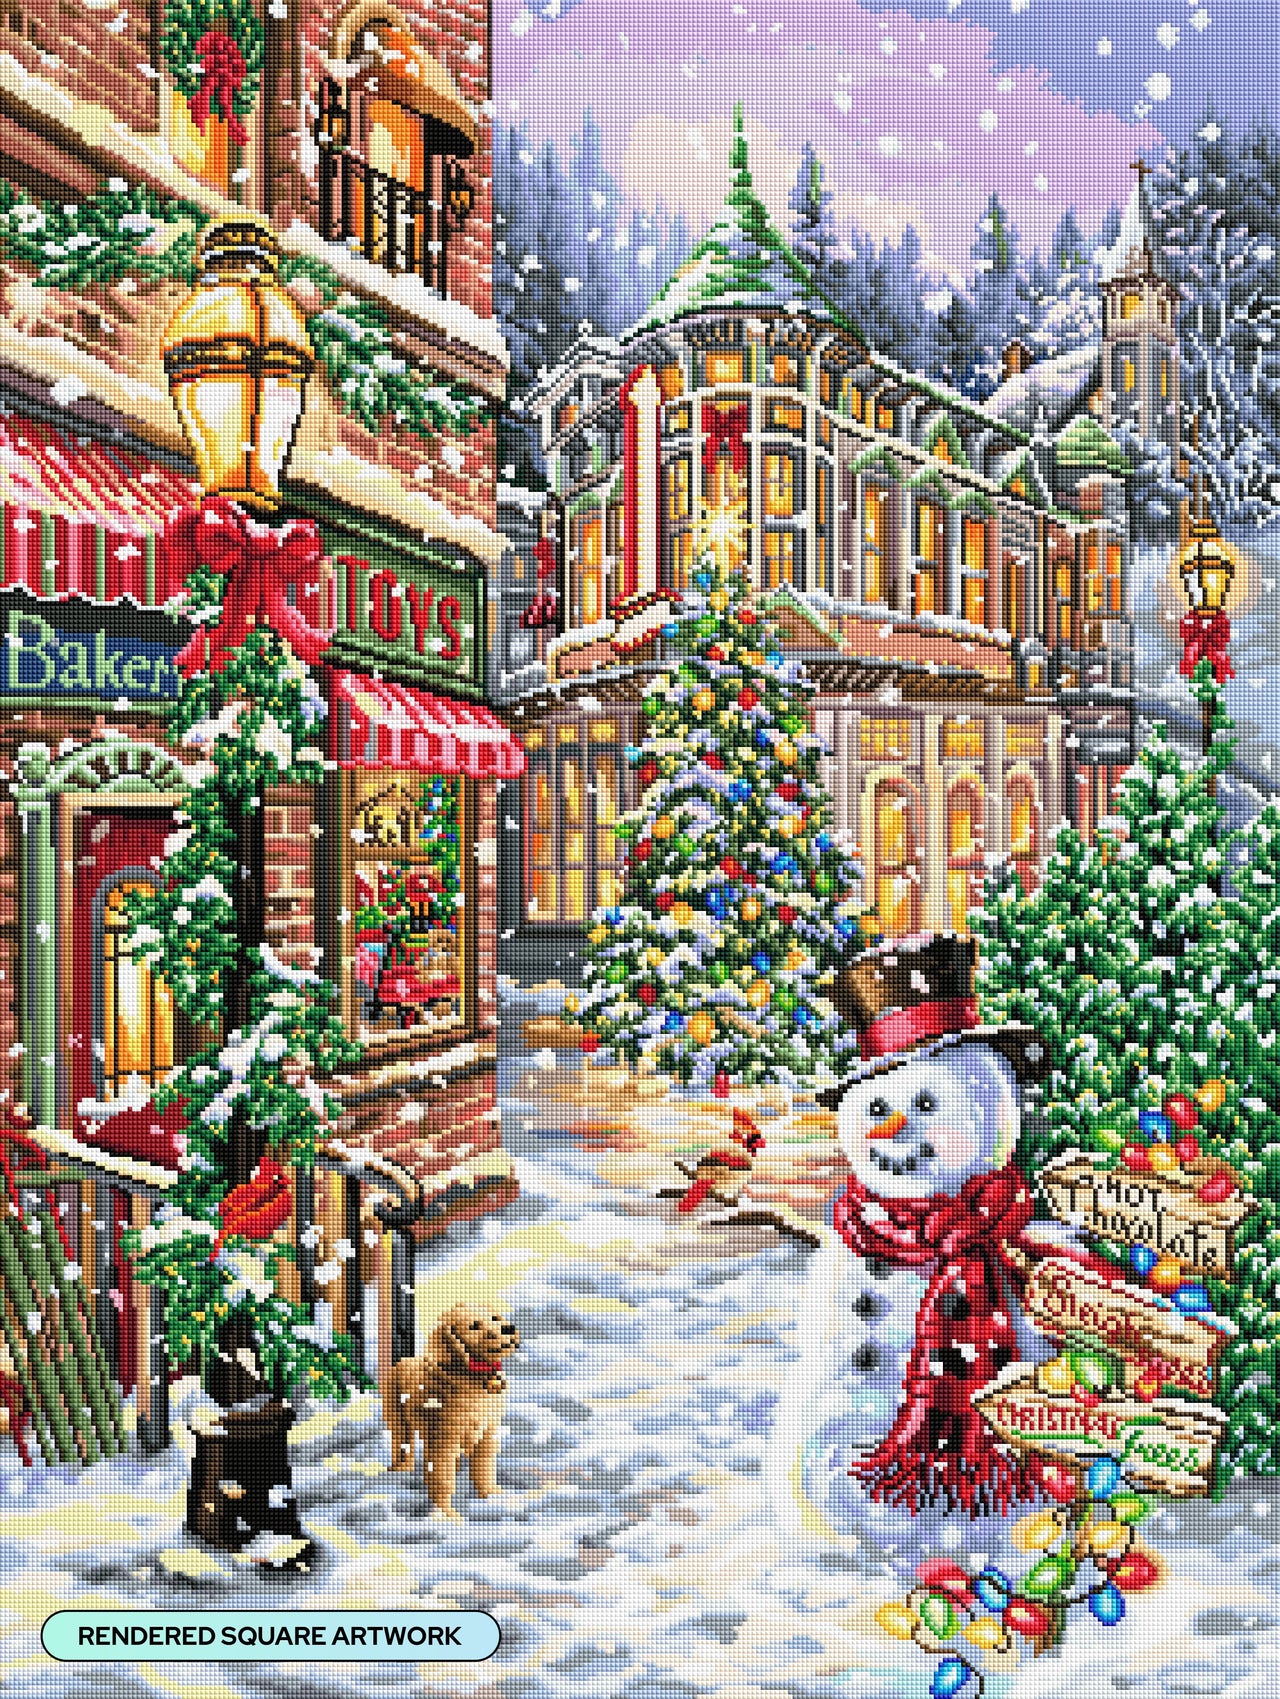 Diamond Painting Christmas Lane 27.6" x 36.6" (70cm x 93cm) / Square with 62 Colors including 4 ABs and 2 Fairy Dust Diamonds / 104,813